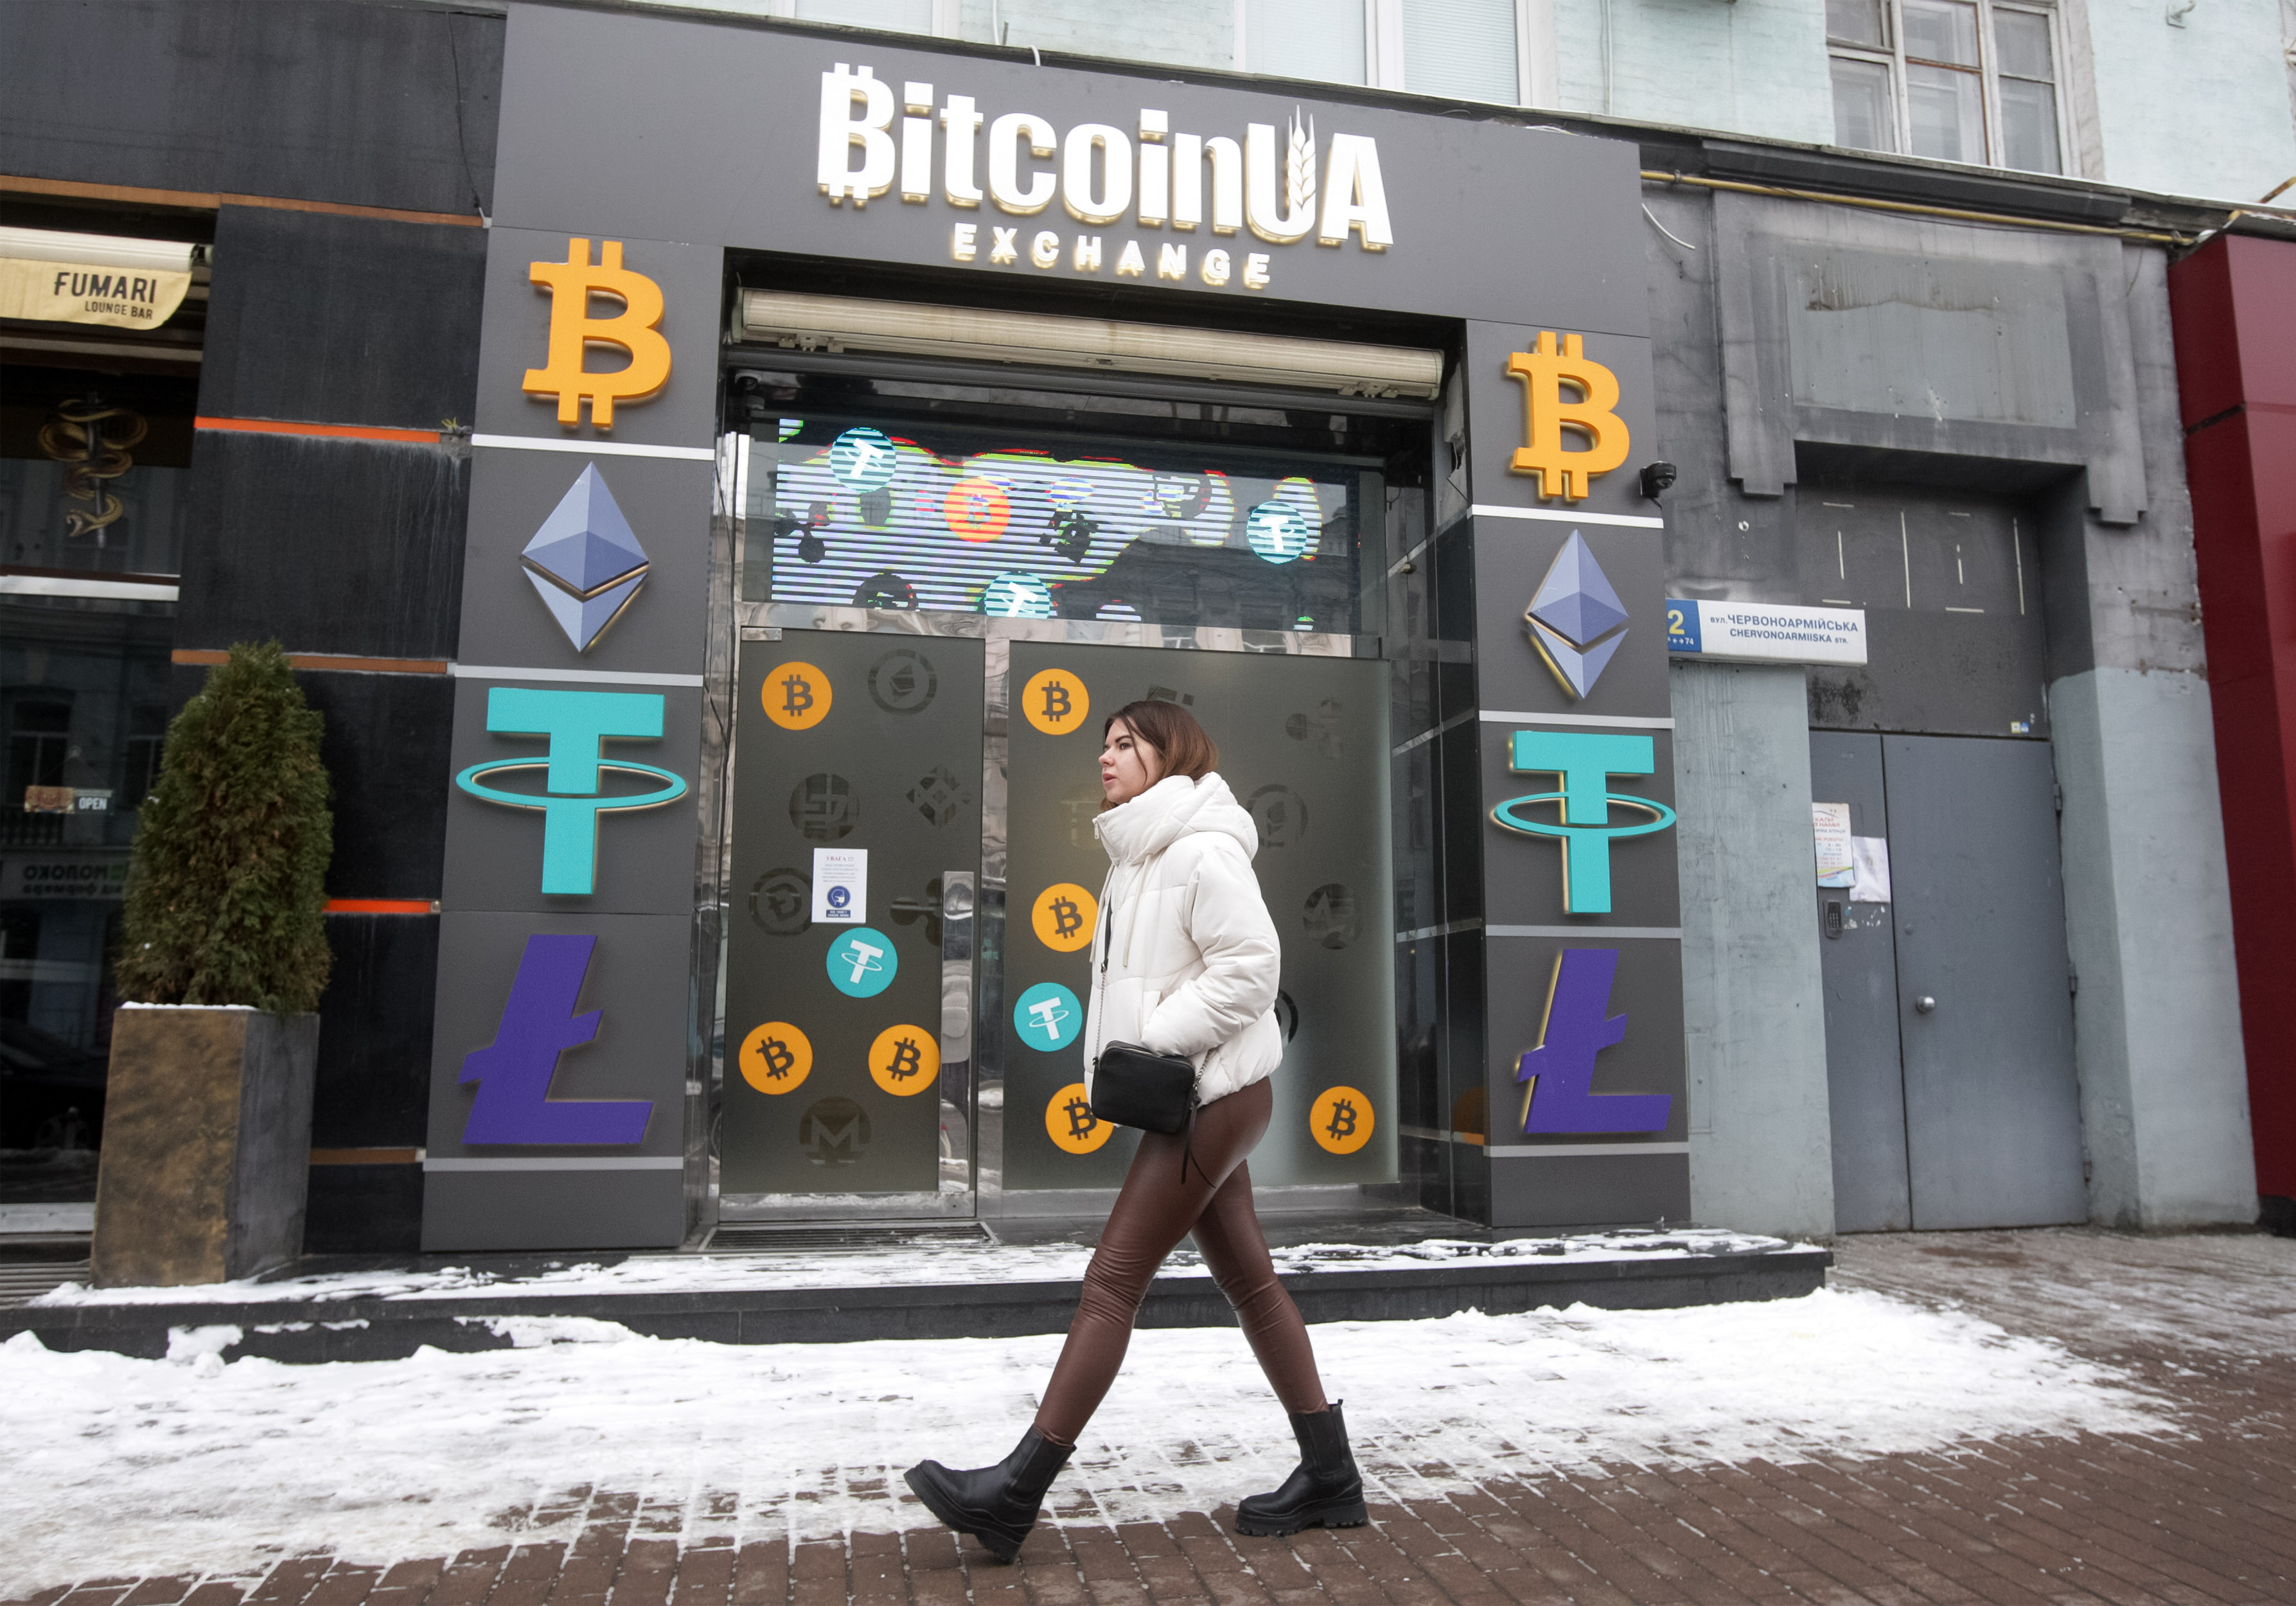 A woman walks past a cryptocurrency exchange point, “BitcoinUA,” in Kyiv, Ukraine.